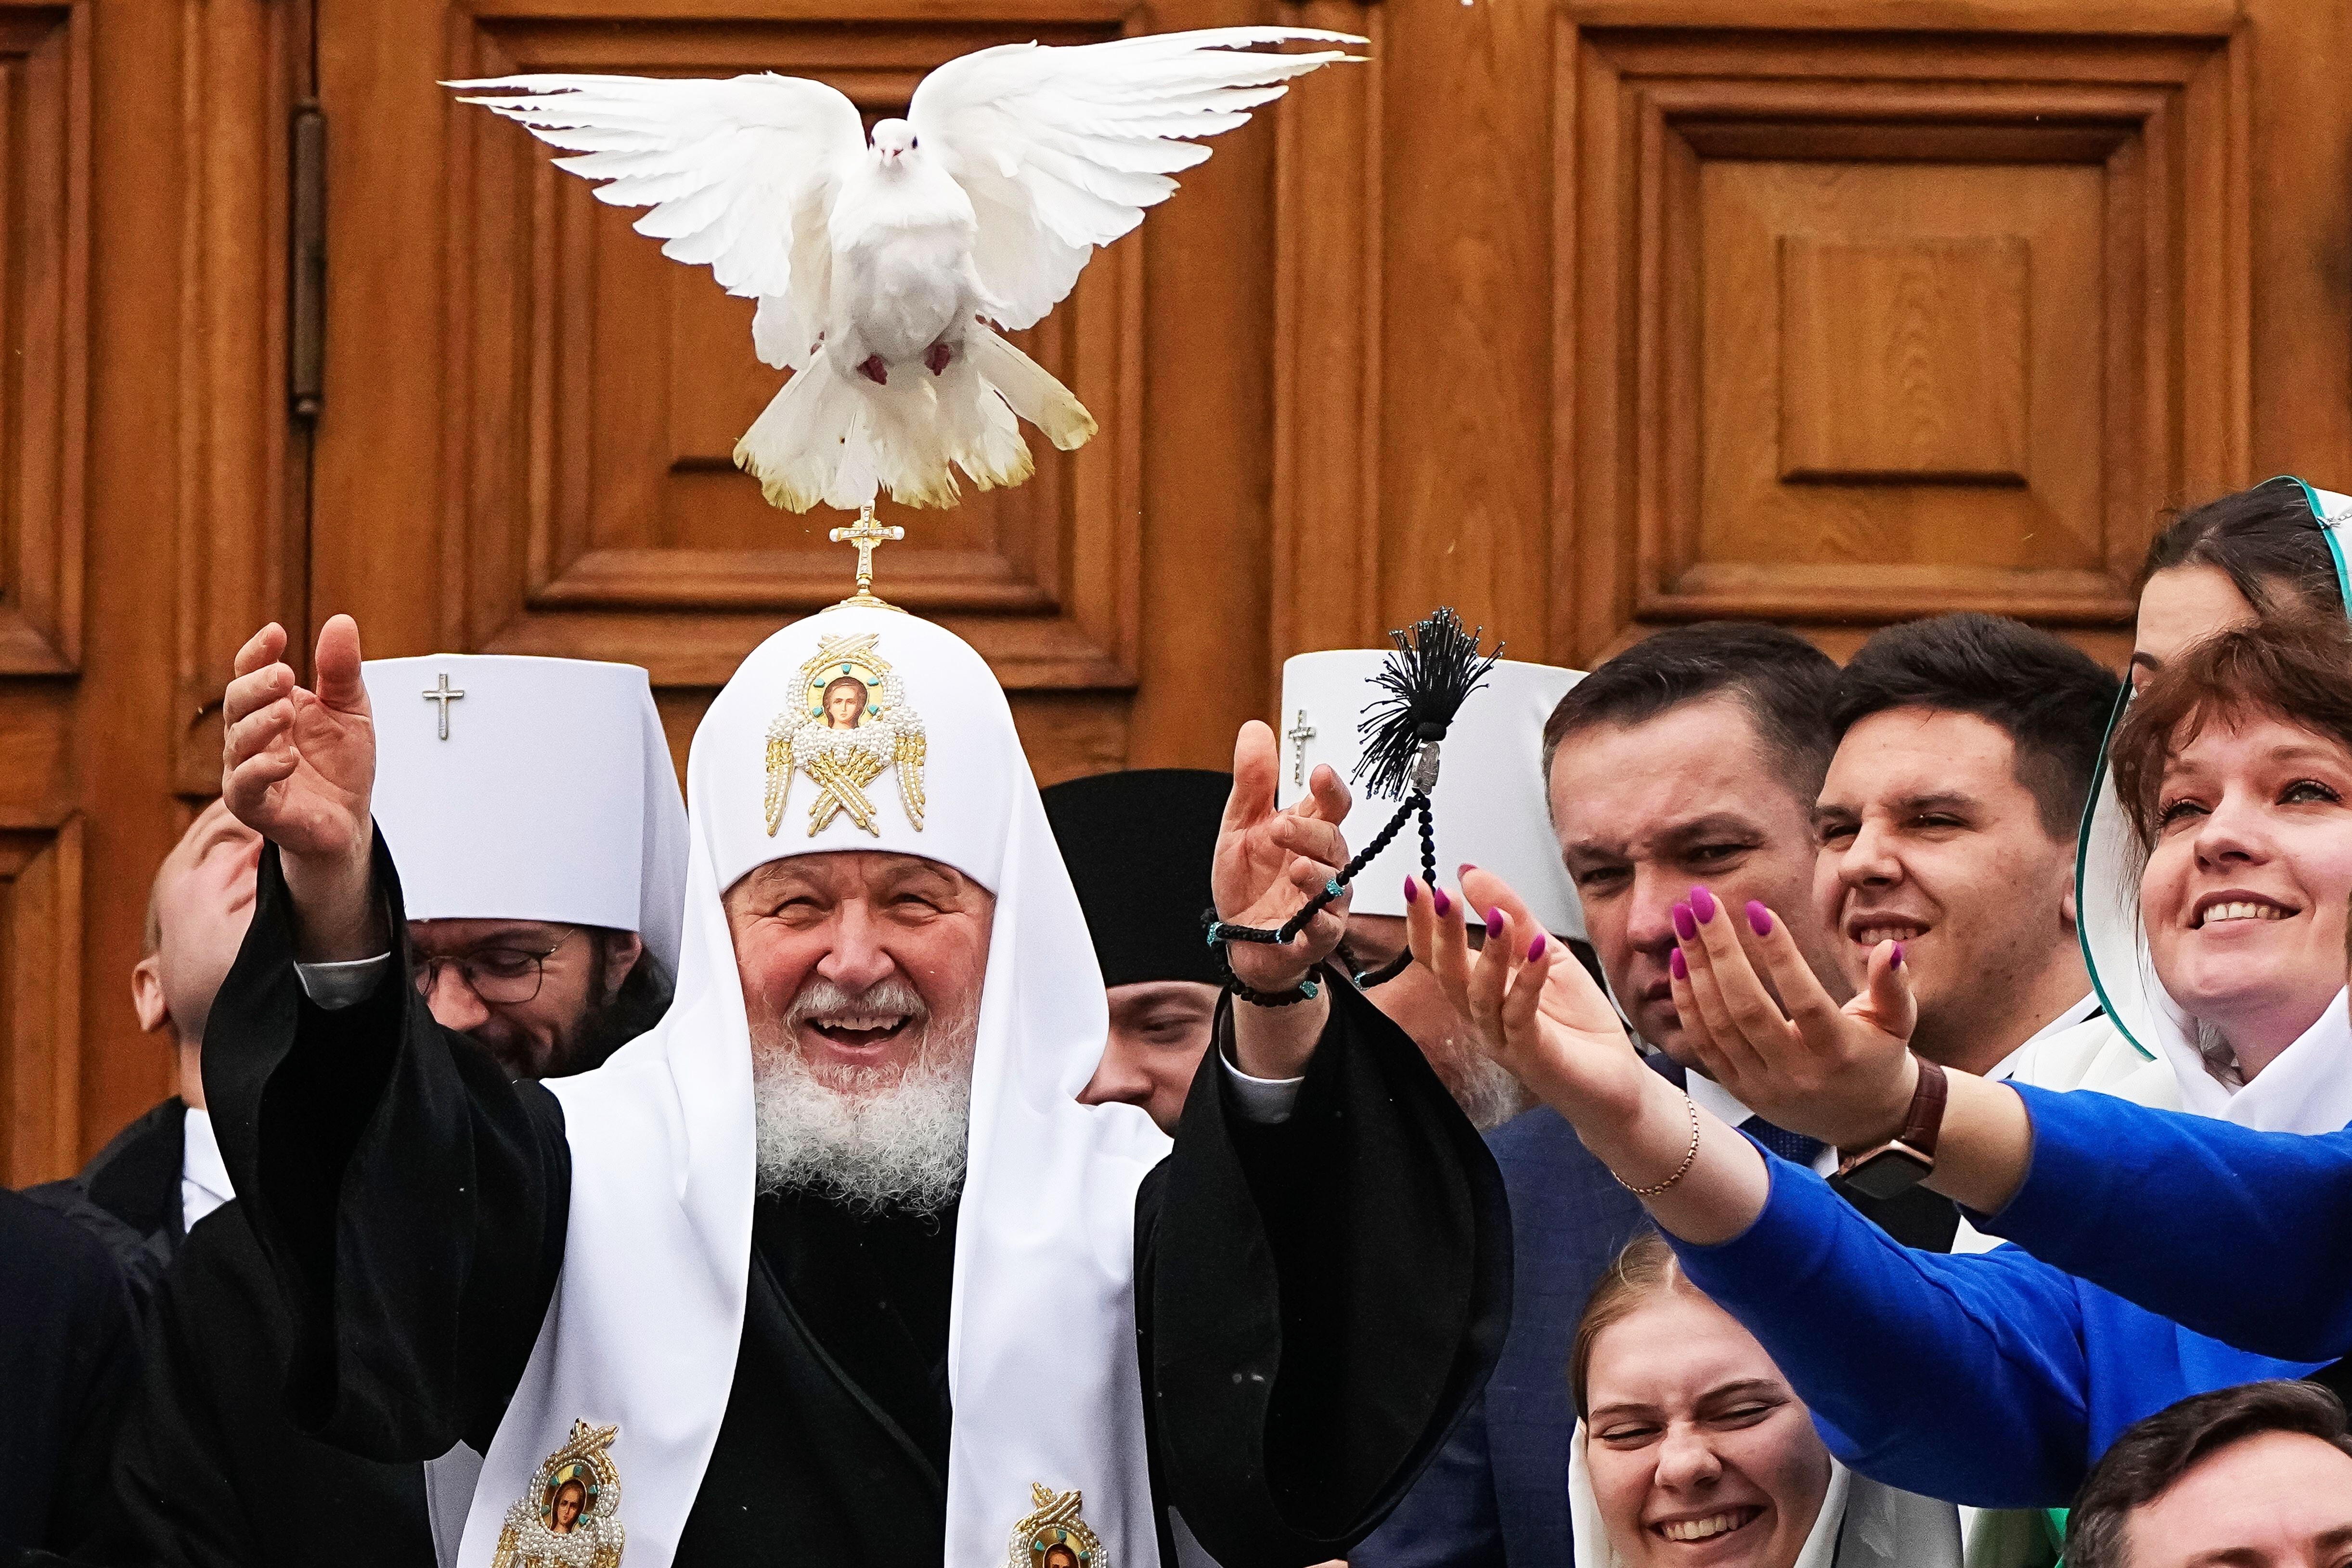 Ukraine invasion cannot be ‘holy’, Church leaders tell Kirill